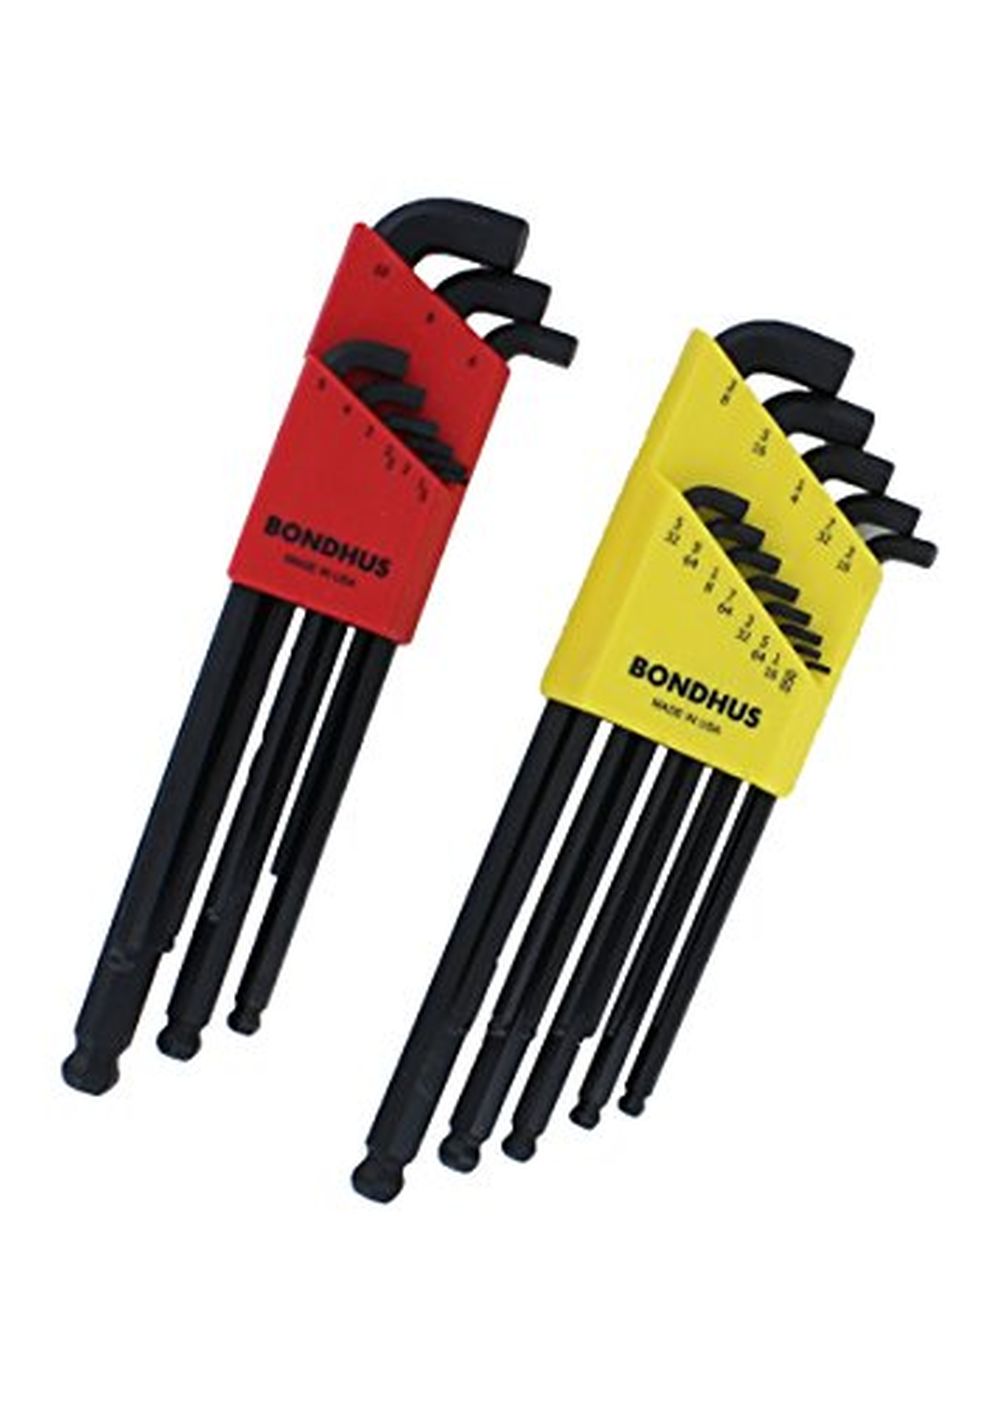 Ball End Inch & Metric Hex Key Sets - .050 to 3/8 & 1.5mm to 10mm (22  Pieces)